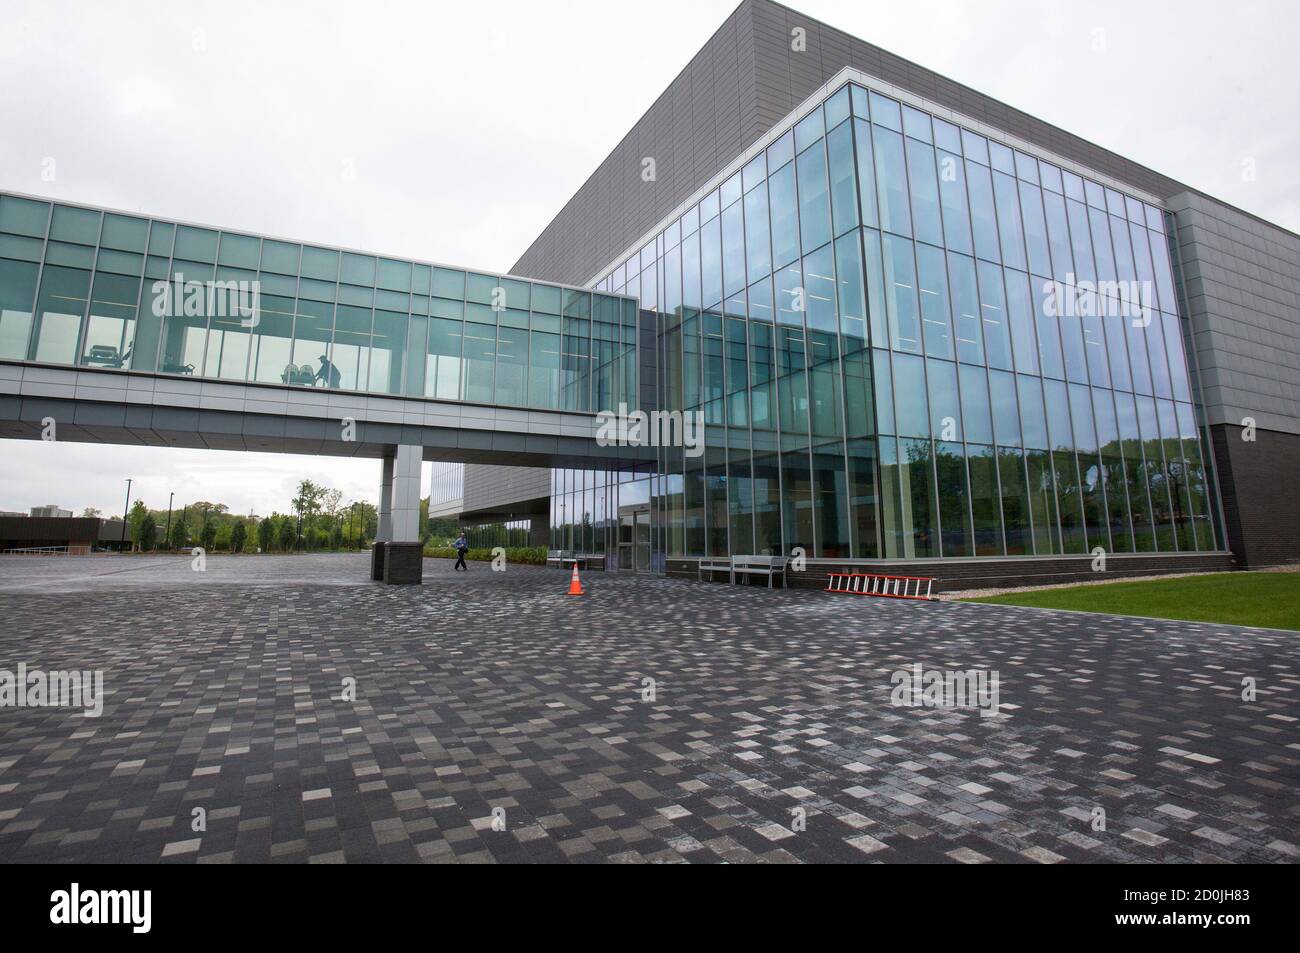 Digital Center 2, a new 194,000 sq. ft building on the ESPN campus in  Bristol, Connecticut May 22, 2014 will be the new home of SportsCenter  beginning June 2014. The facility includes